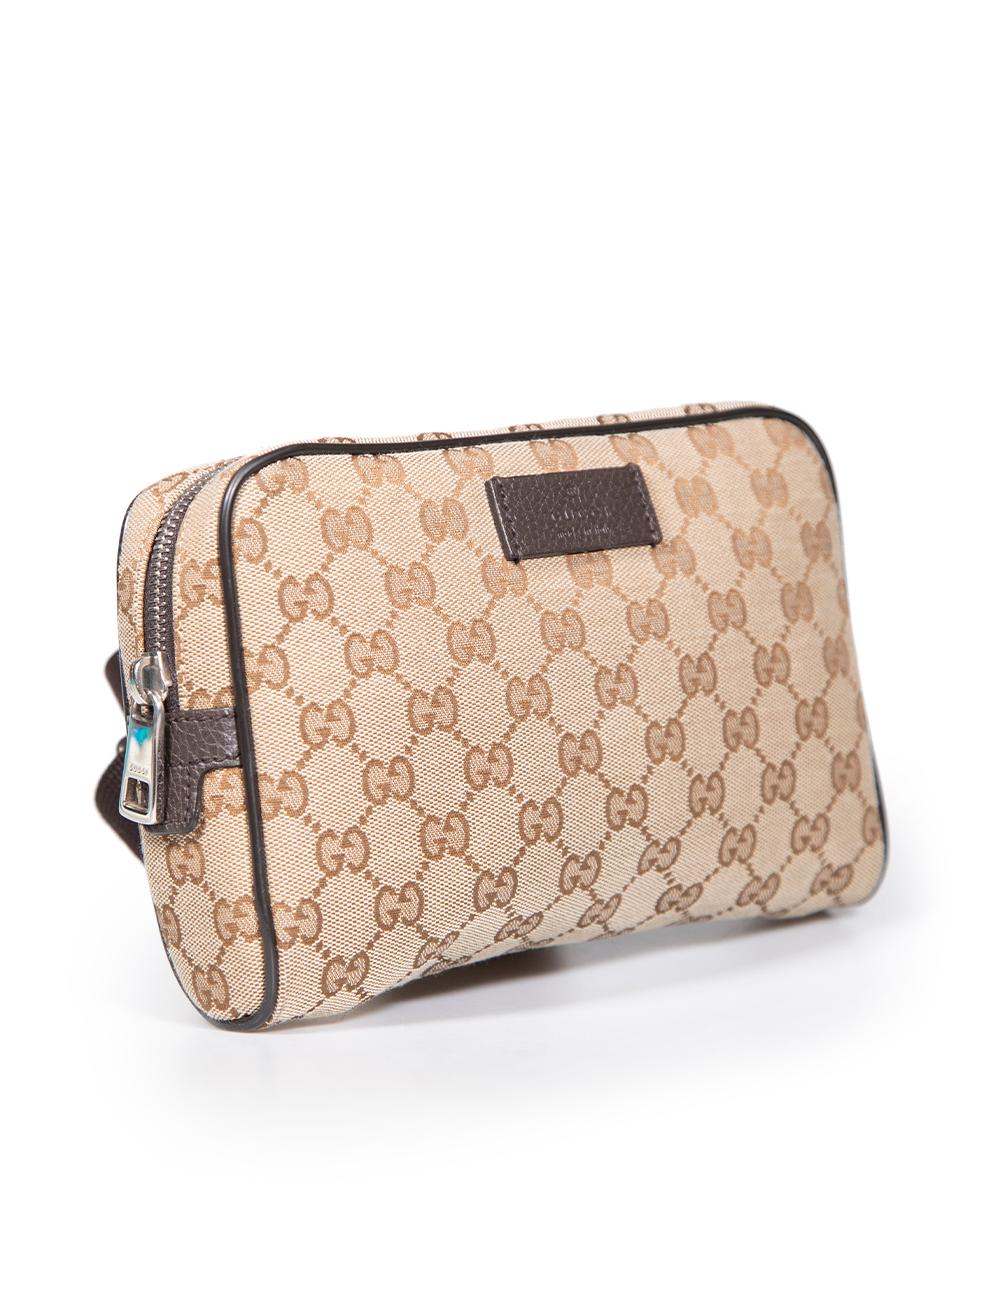 CONDITION is Very good. Minimal wear to bag is evident. Minimal wear to the clip fastening with light scratches to the metal hardware and slight wearing to the rear base corners on this used Gucci designer resale item. This item comes with original